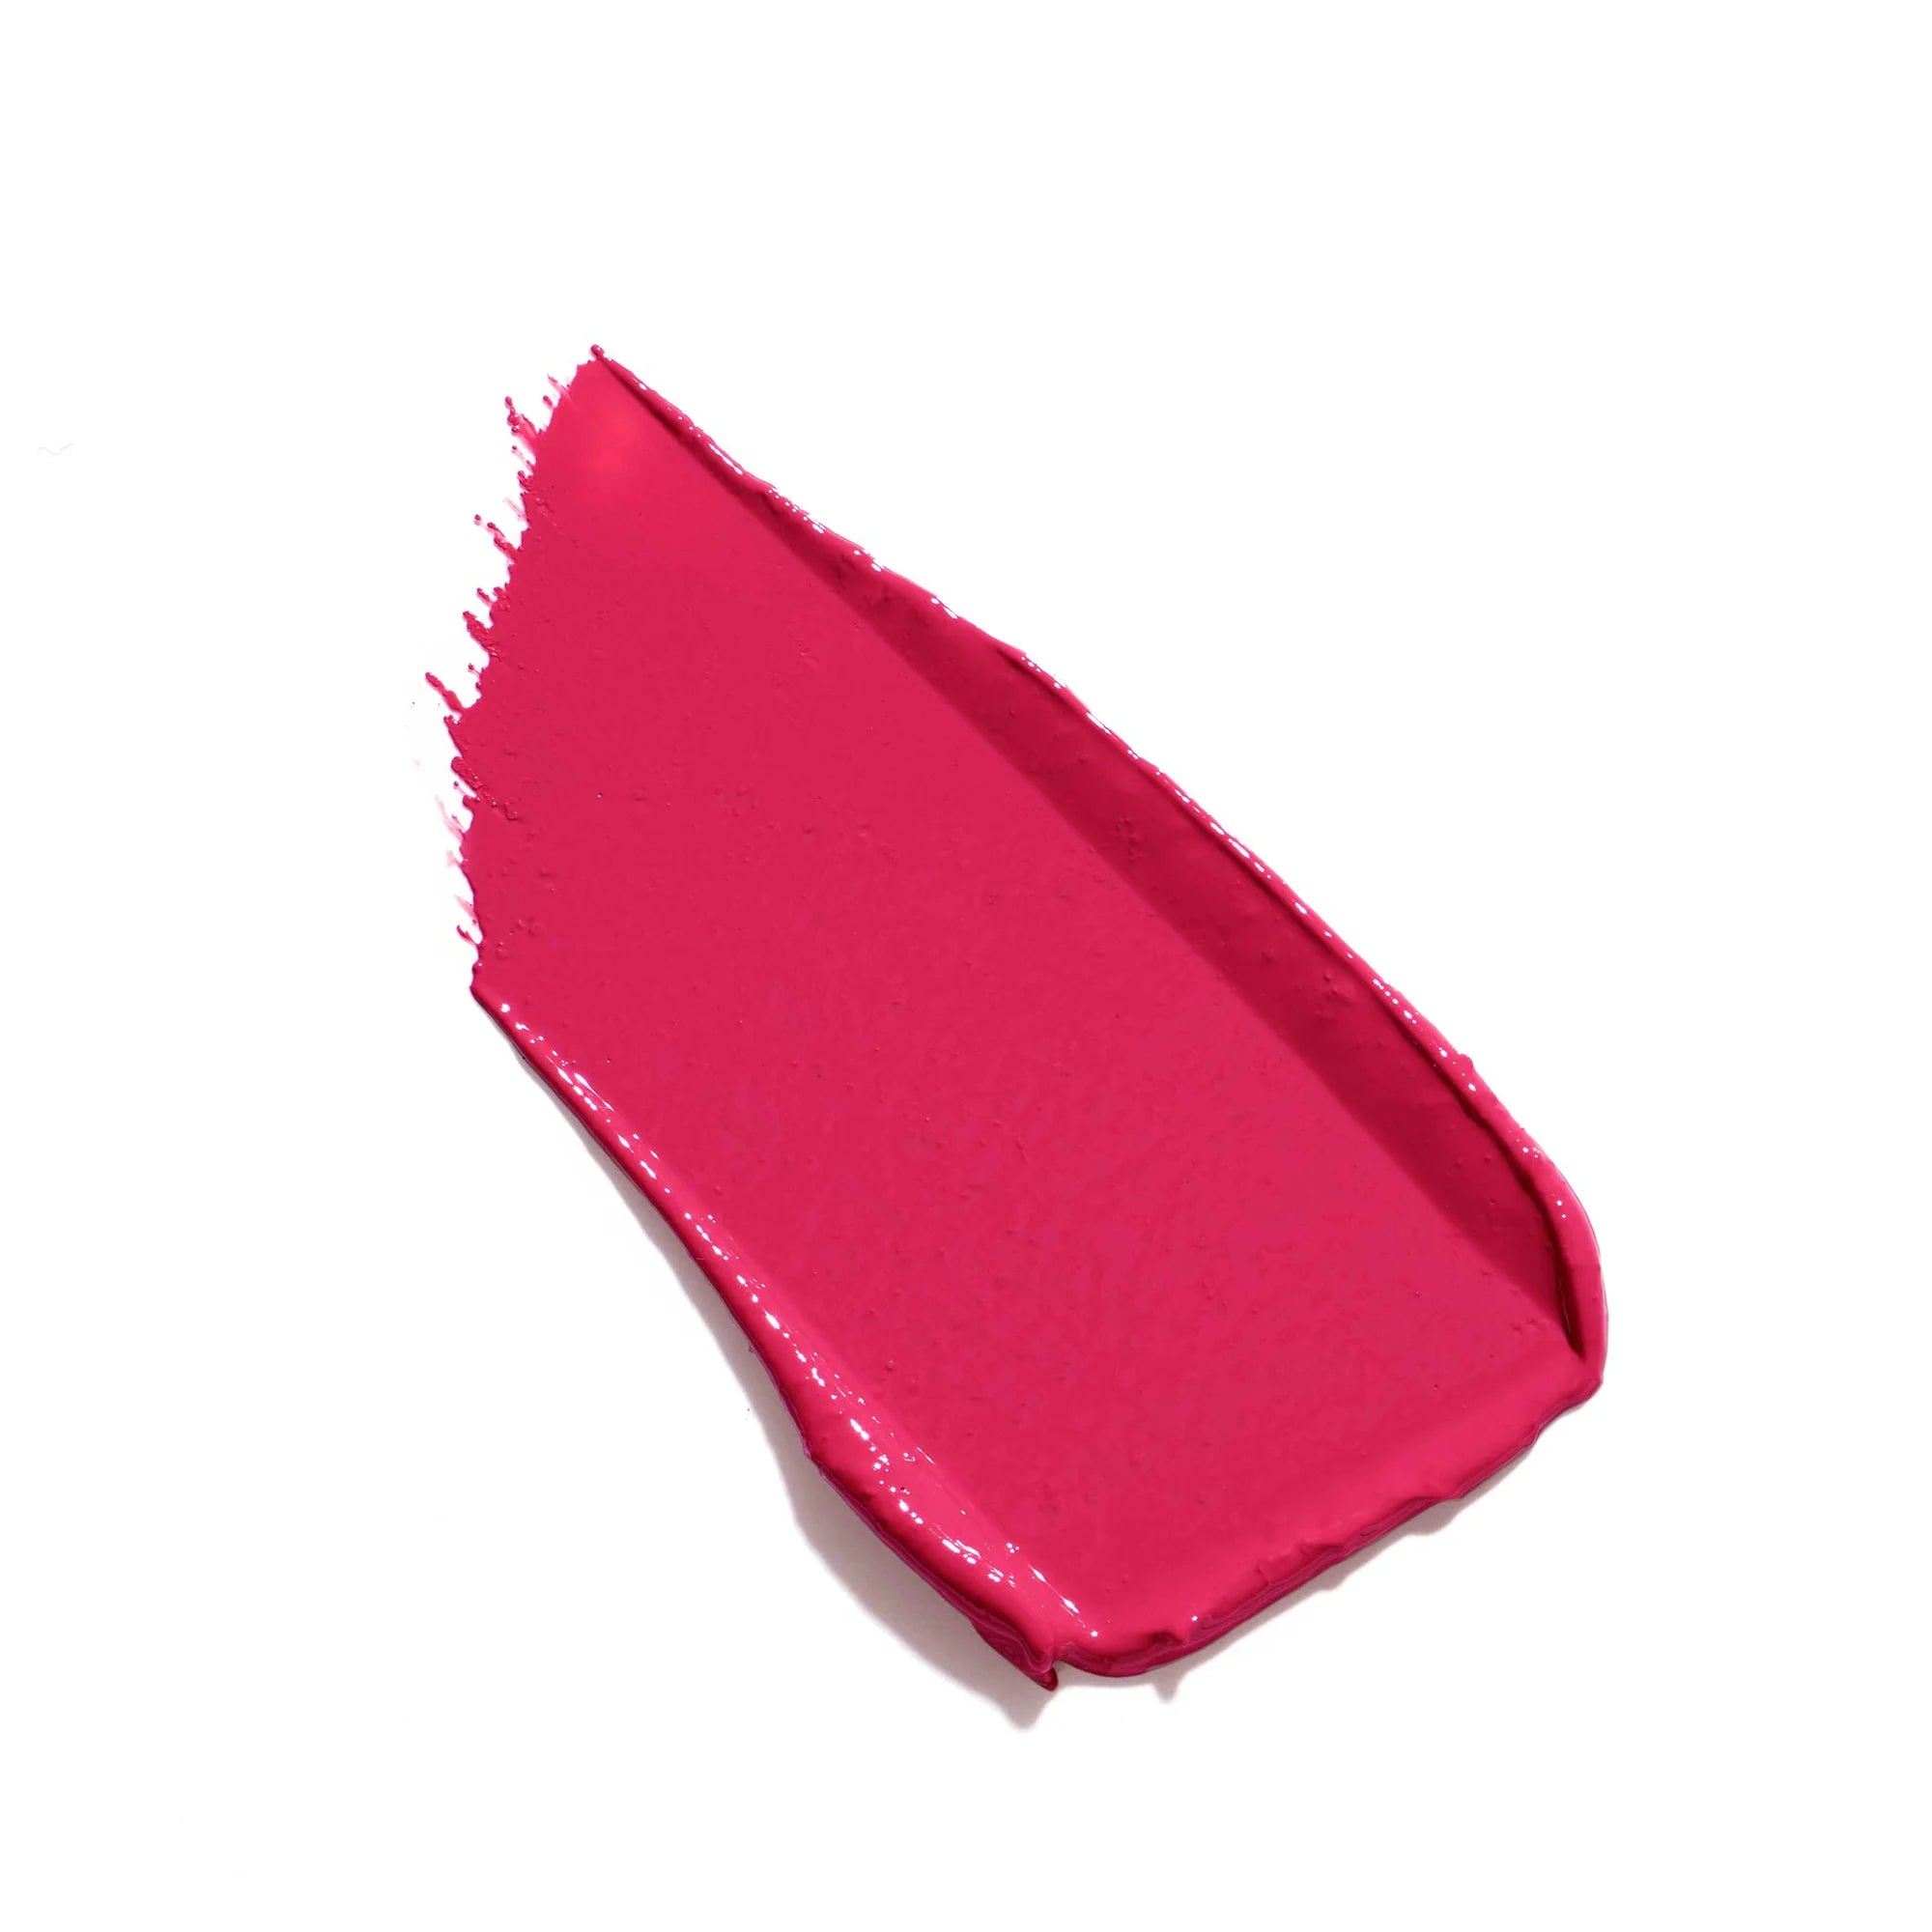 Jane Iredale's ColorLuxe Hydrating Cream Lipstick - swatch and color Peony - cool medium fuchsia